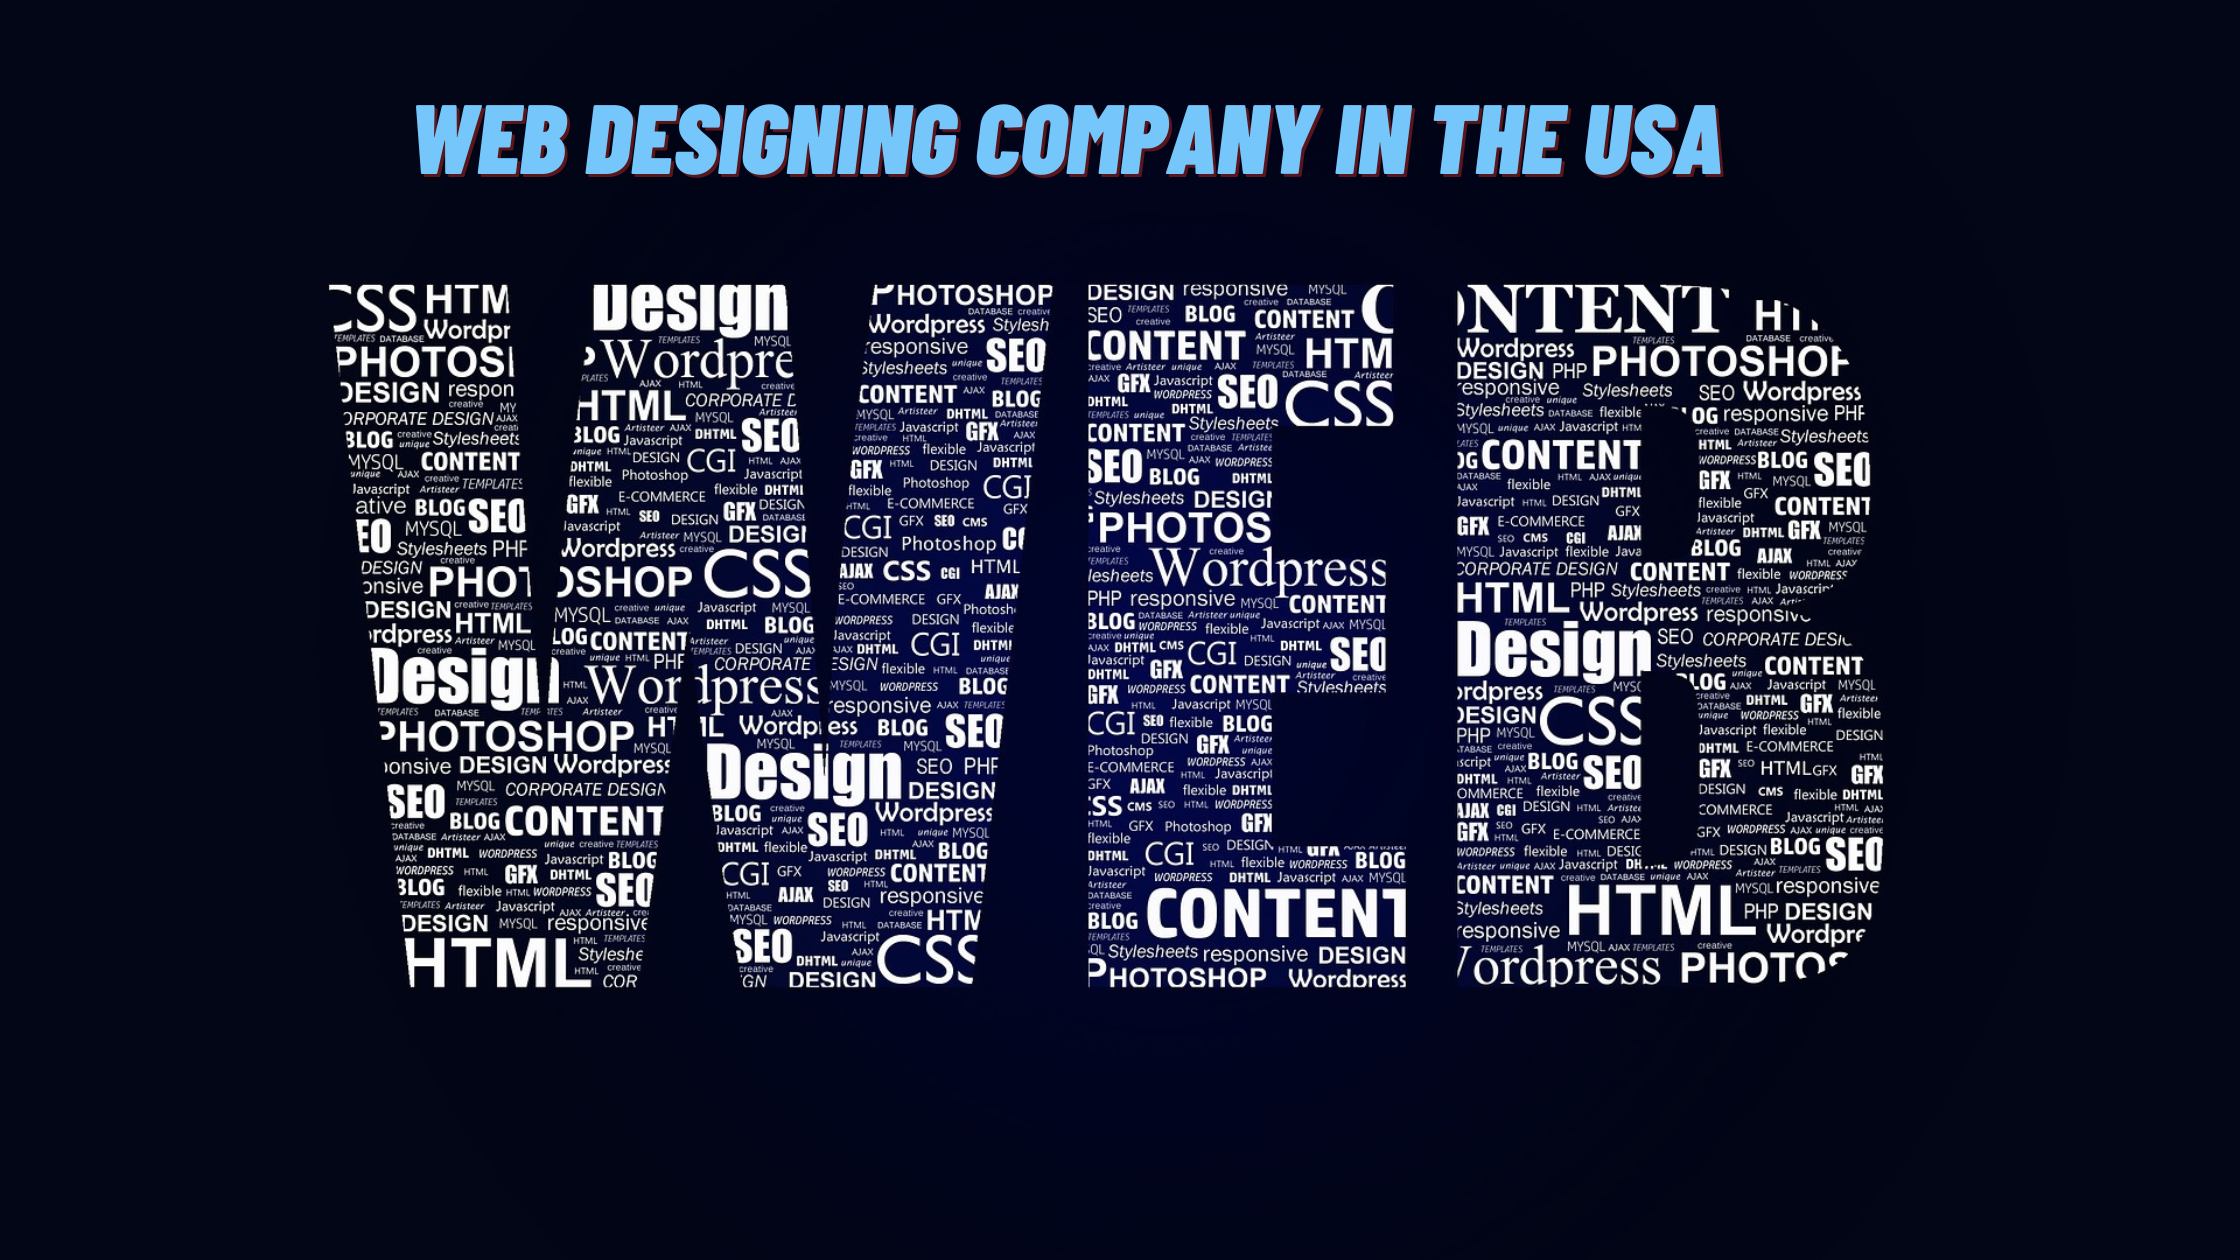 Web Designing Company in the USA